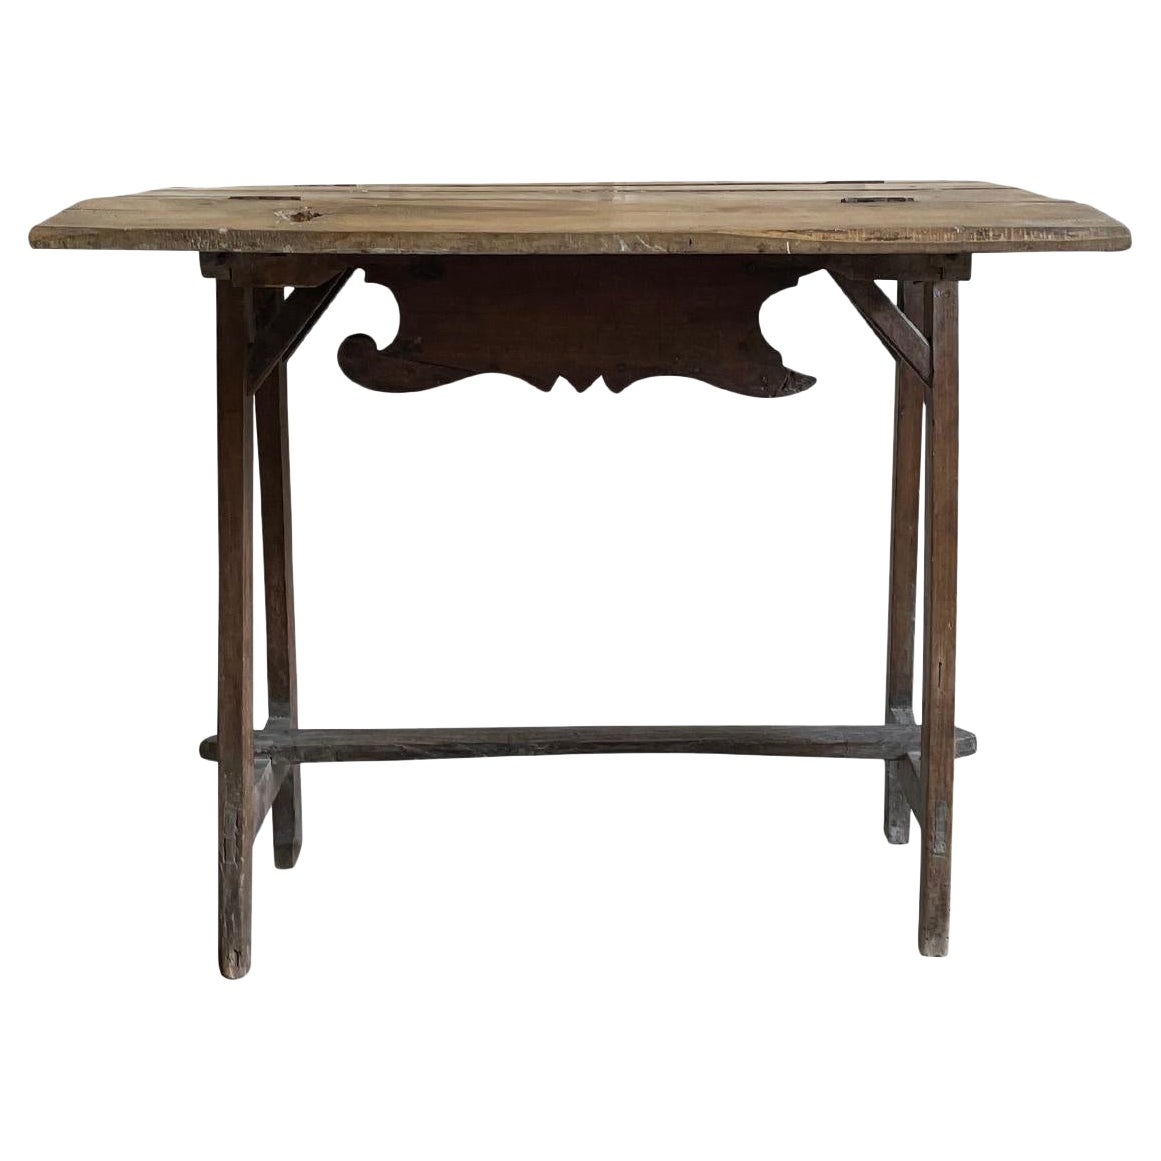 18th Century Italian Small Foldable Walnut Side Table - Antique Tuscan Table For Sale